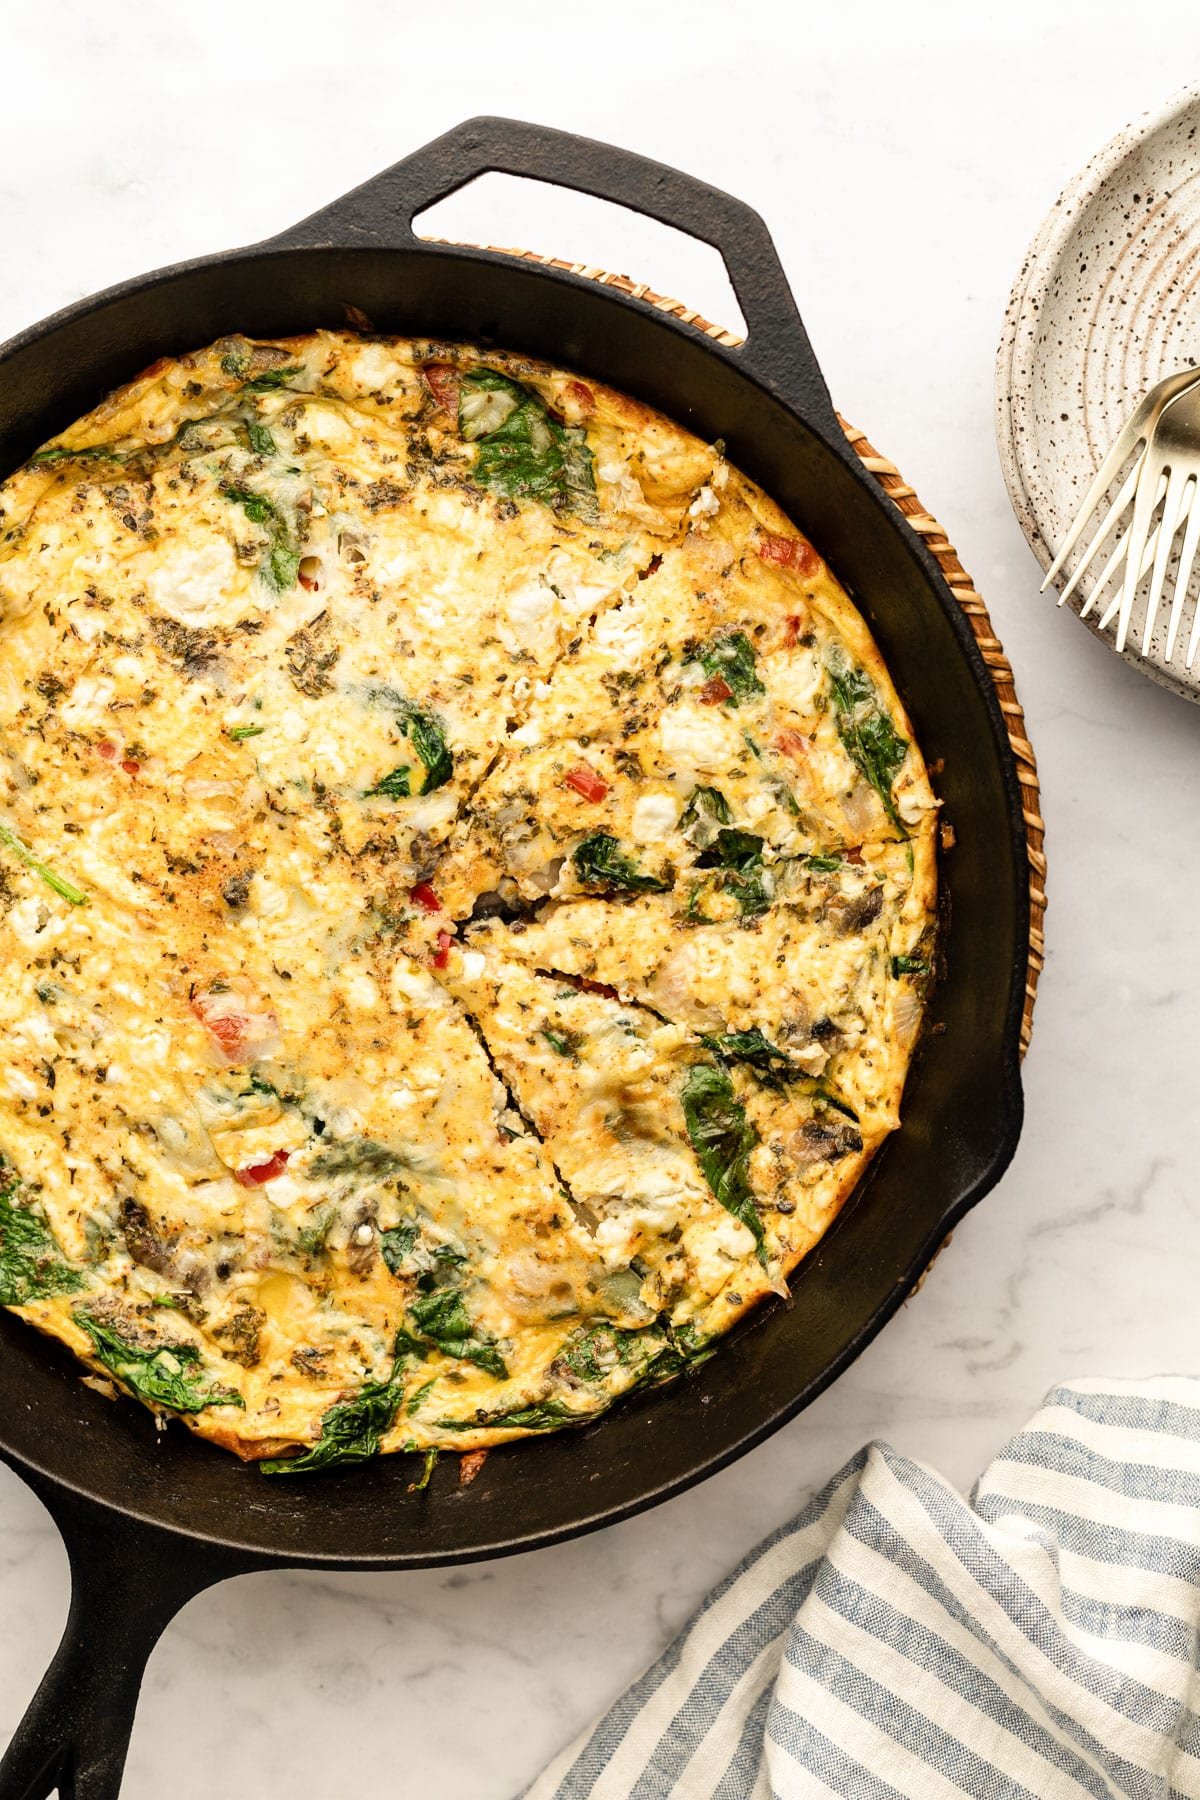 https://thewholecook.com/wp-content/uploads/2022/08/Vegetable-Frittata-1-4.jpg